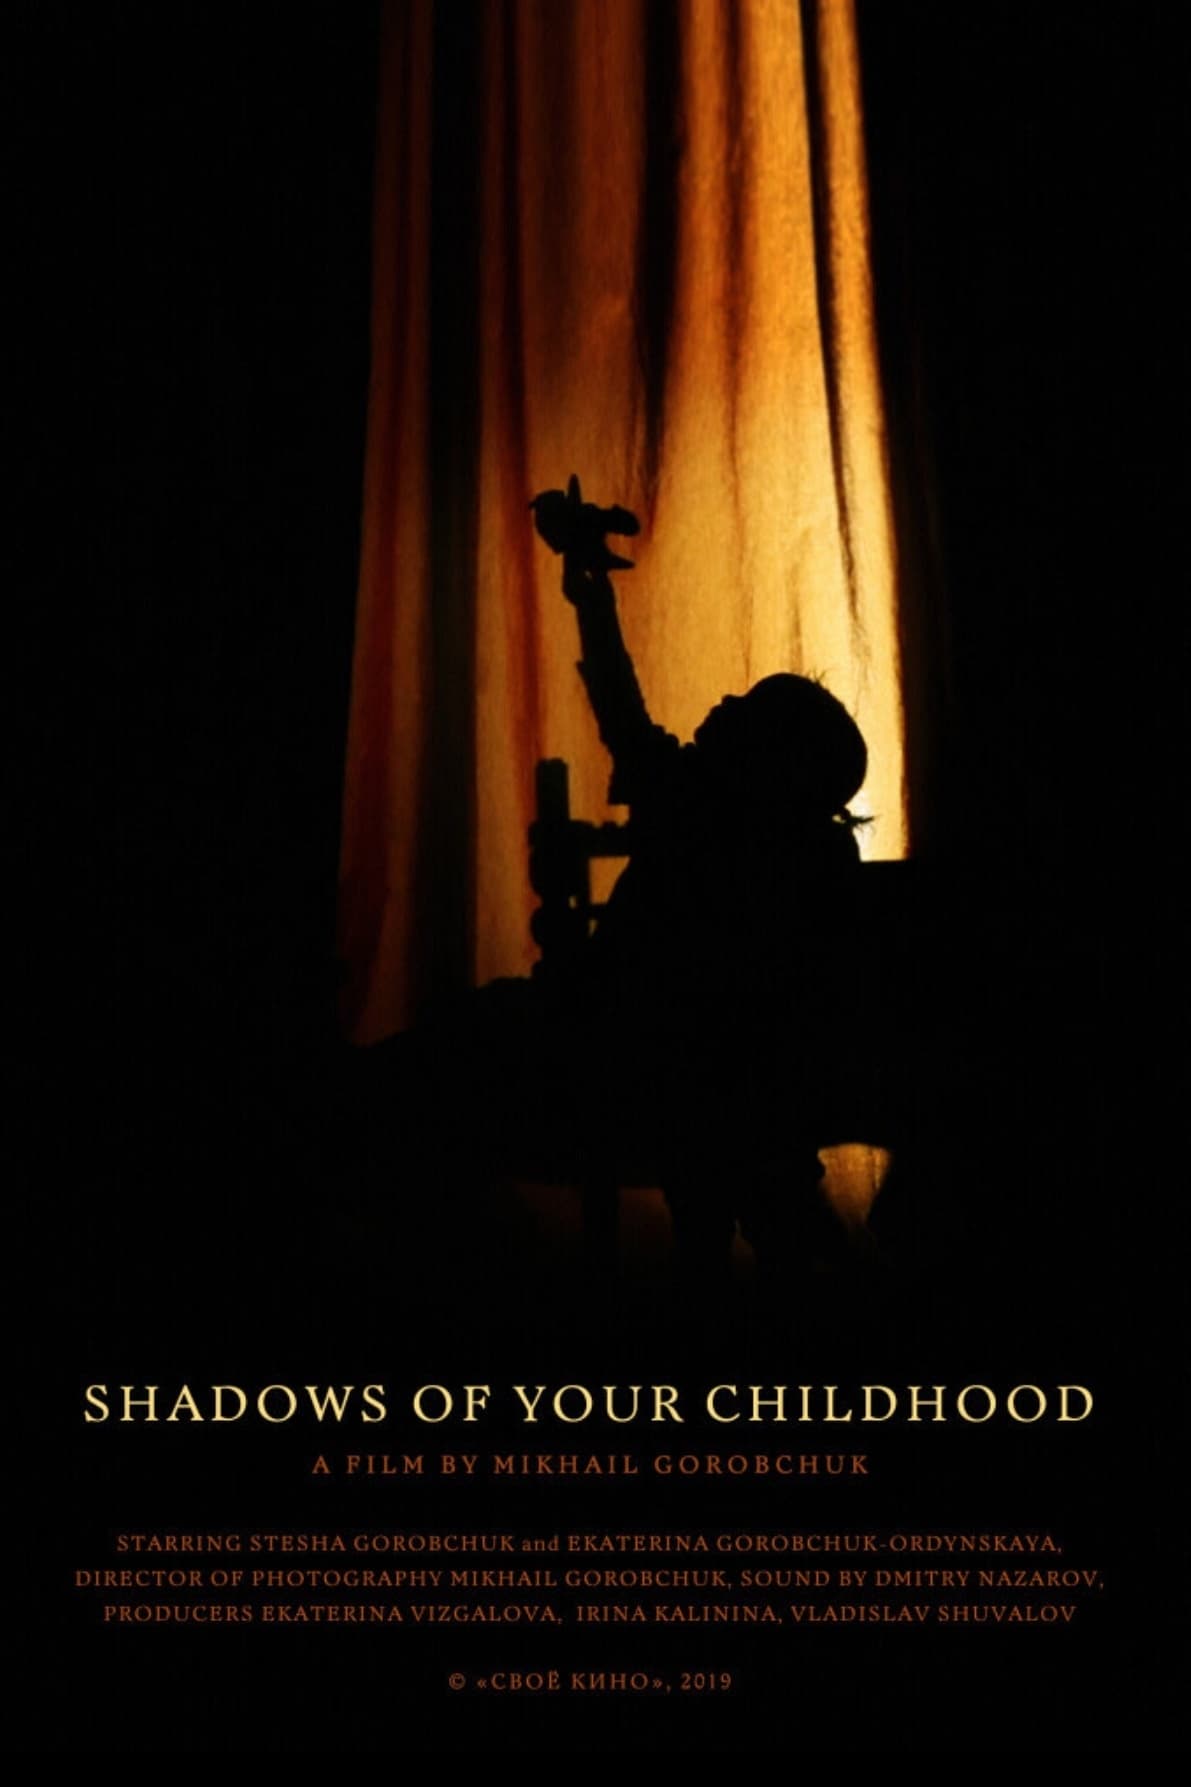 Shadows of Your Childhood